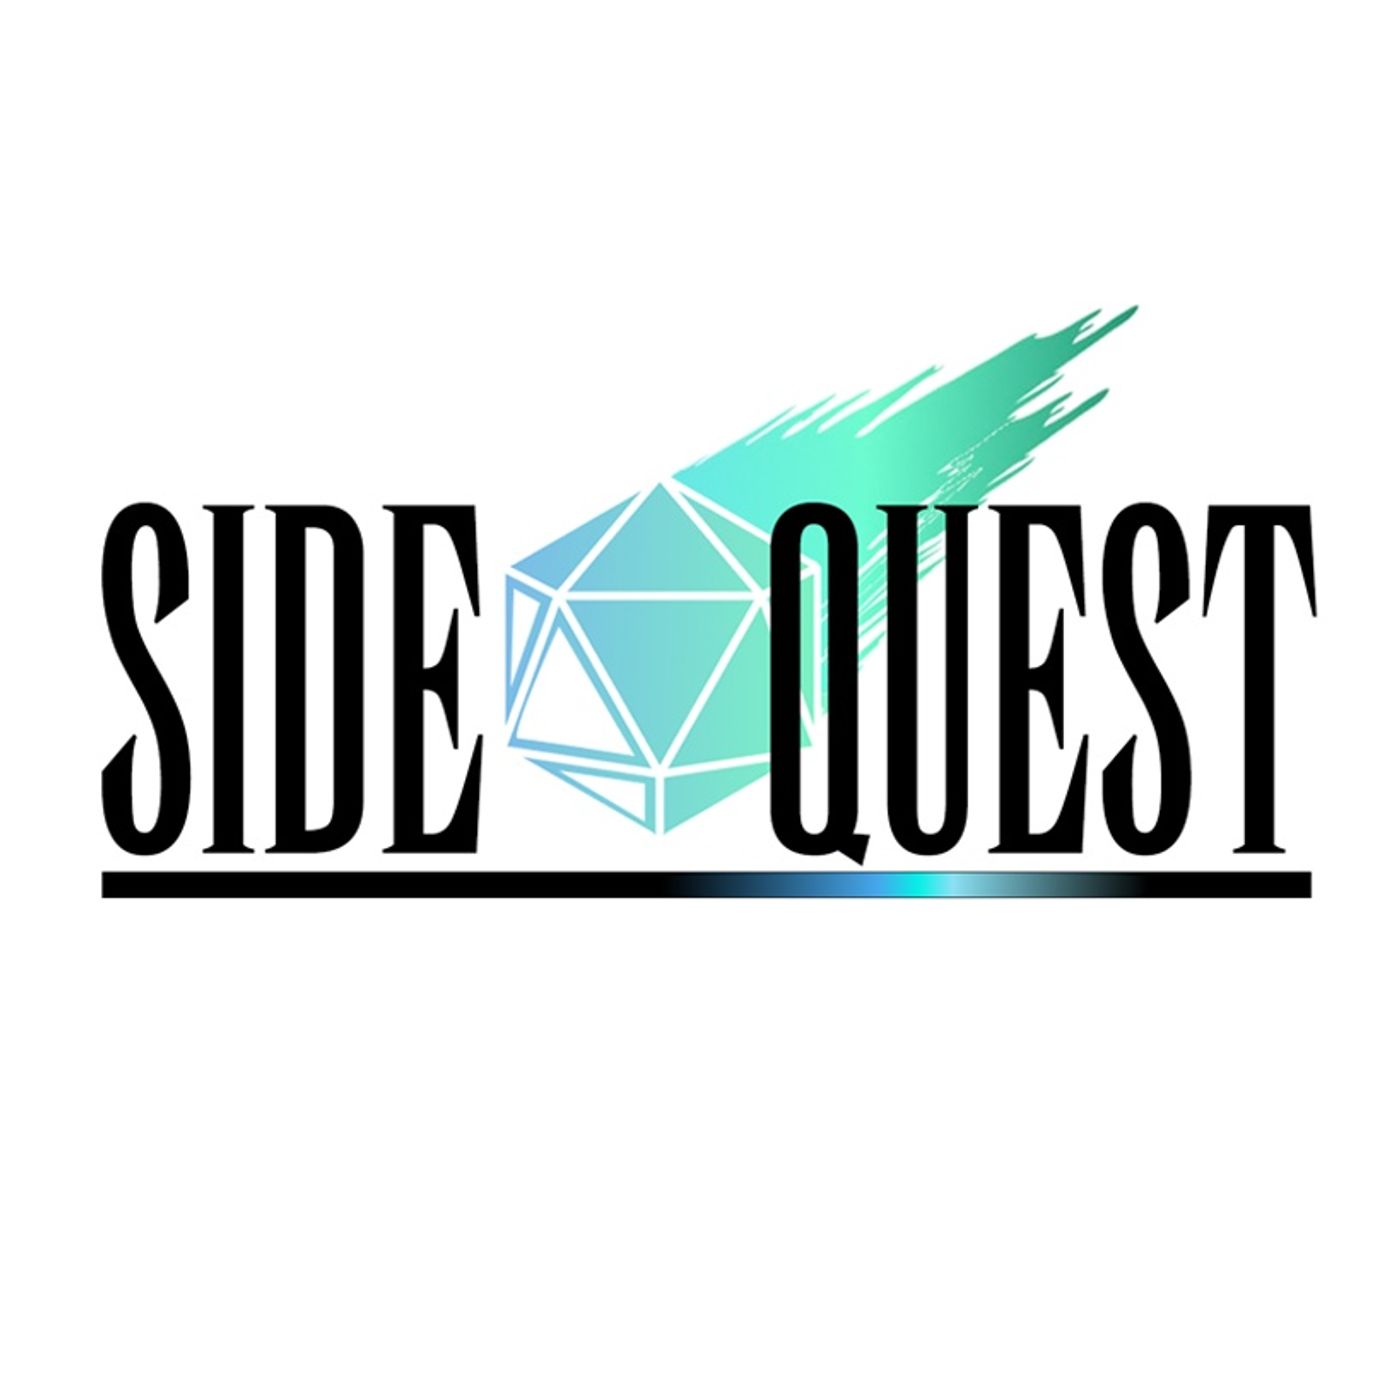 Side Quest 124: Snubbed for the Oscars